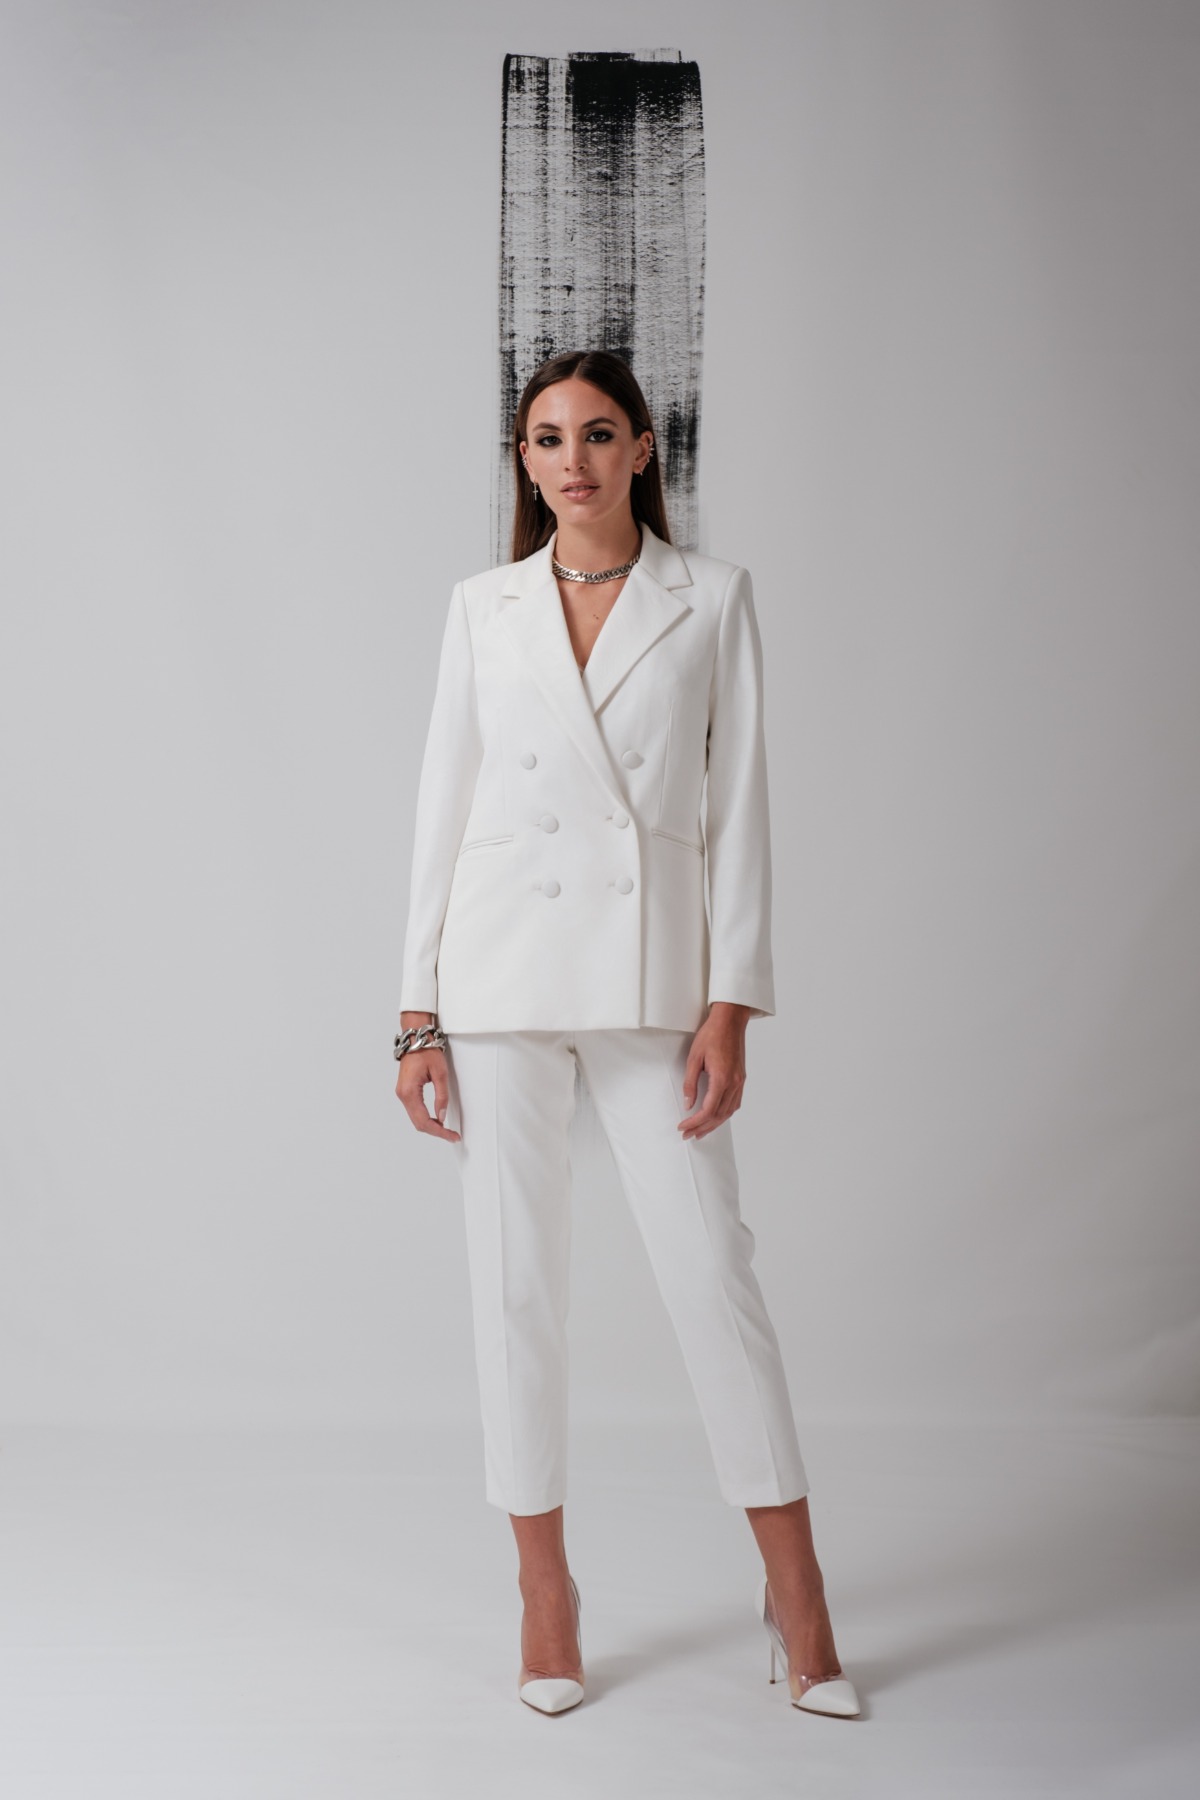 Collection EVERYDAY - Ready-to-wear in white